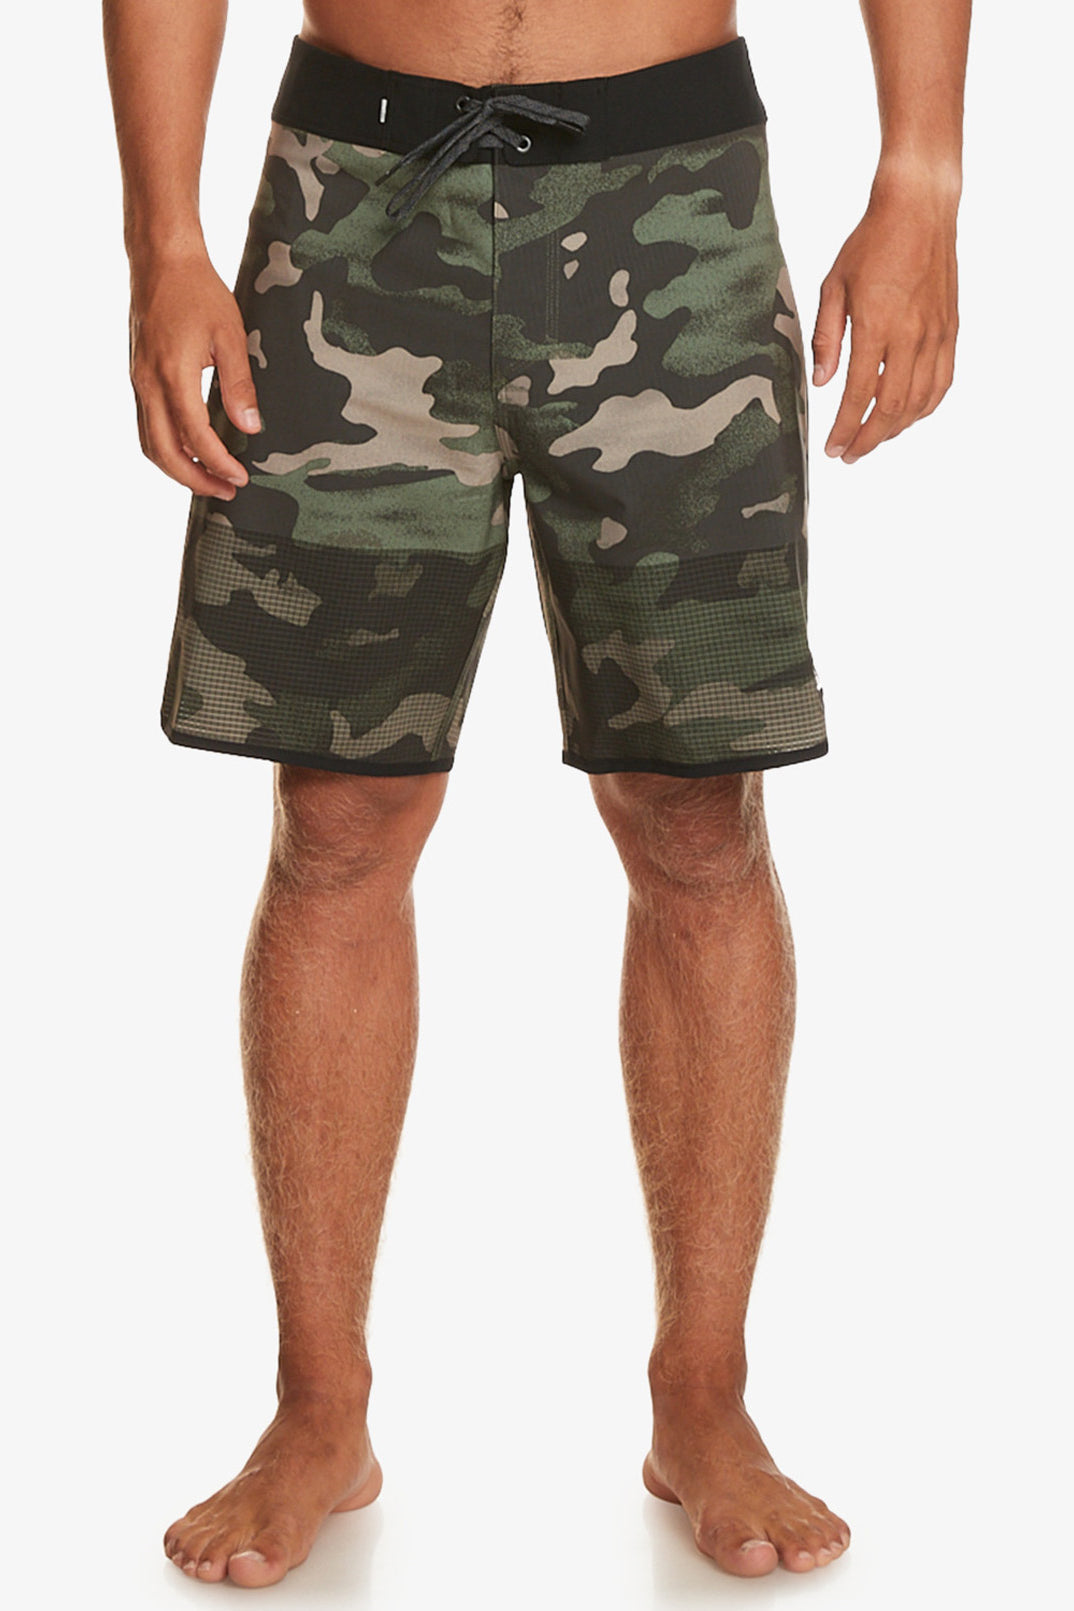 Quiksilver: Highlite Scallop19" Boardshorts